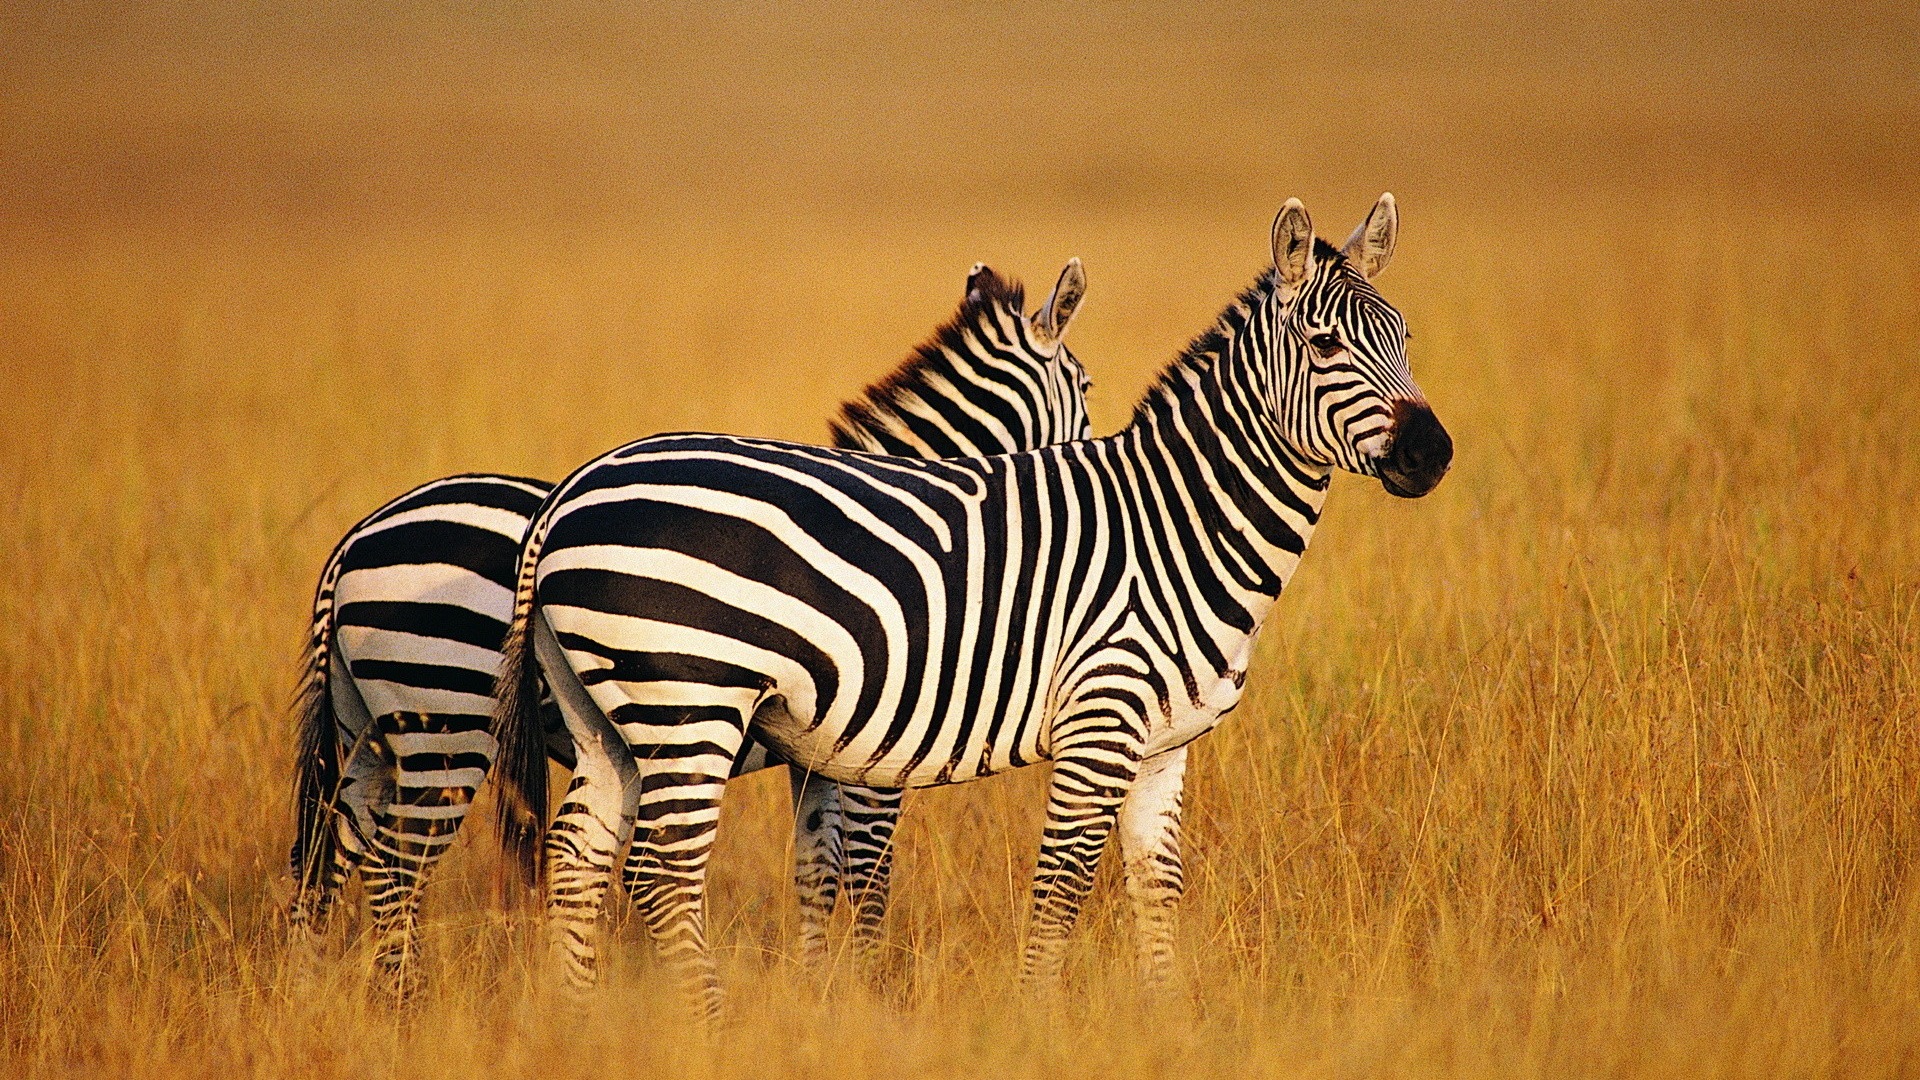 Black and white striped animal, zebra HD wallpapers #7 - 1920x1080